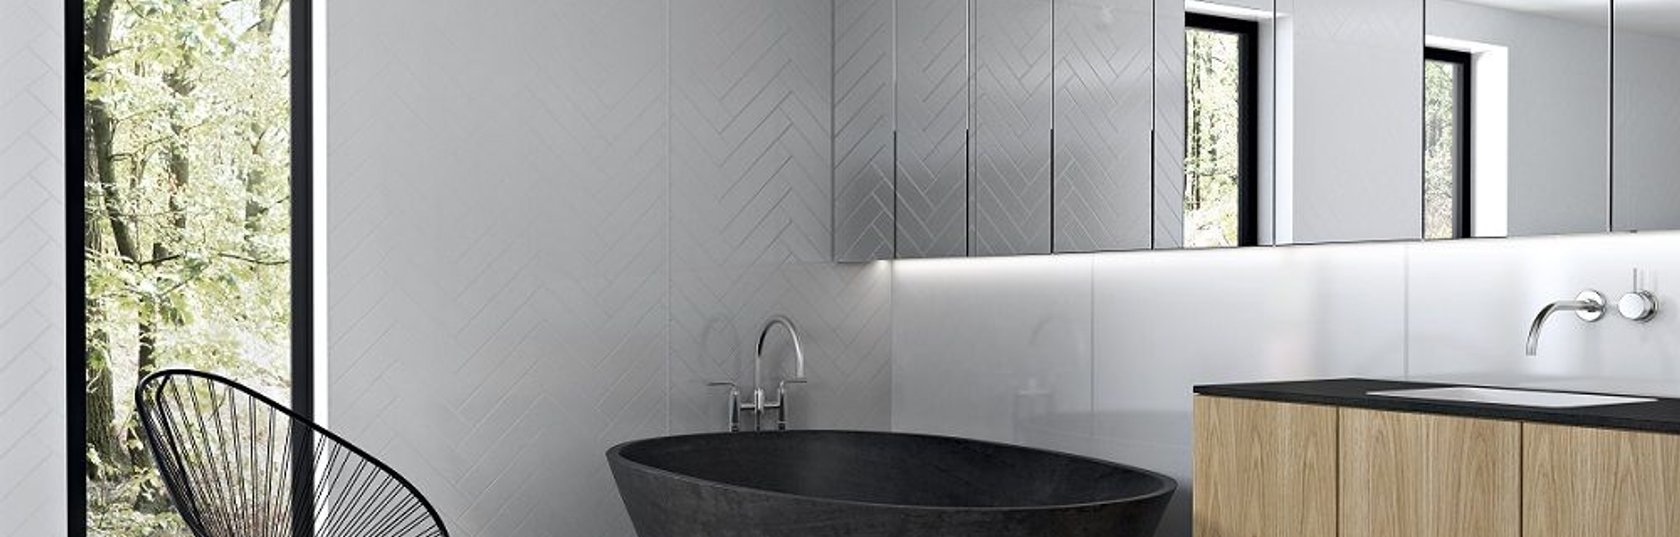 Creating tile-look finishes with water resistant surfaces